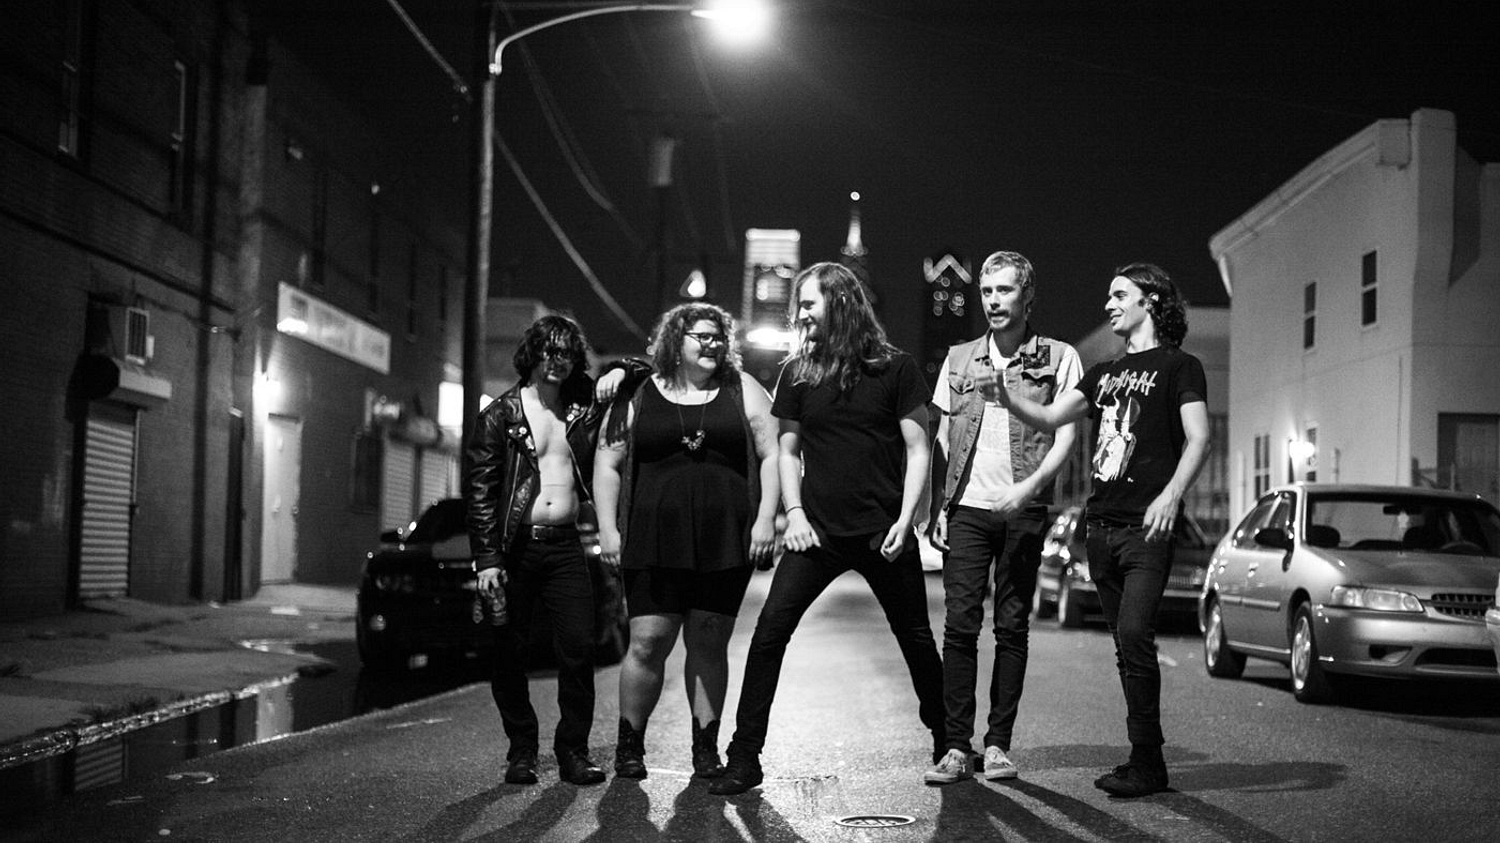 From Sheer Mag to sheer force, DIY’s SXSW 2015 discoveries